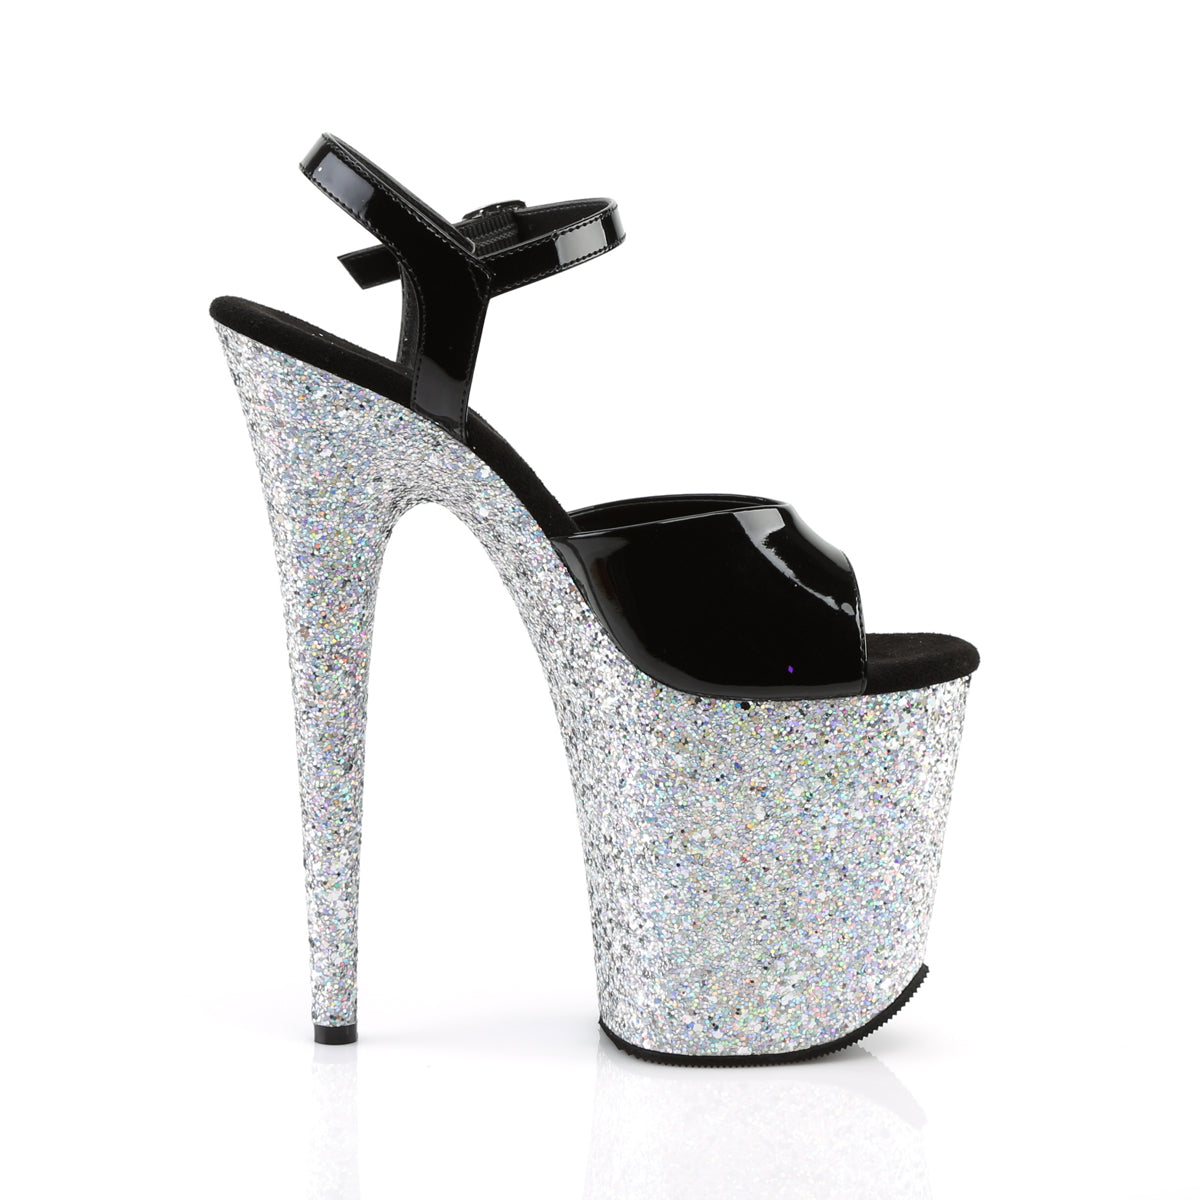 FLAMINGO-809LG 8" Heel Black Silver Glitter Strippers Shoes-Pleaser- Sexy Shoes Fetish Heels